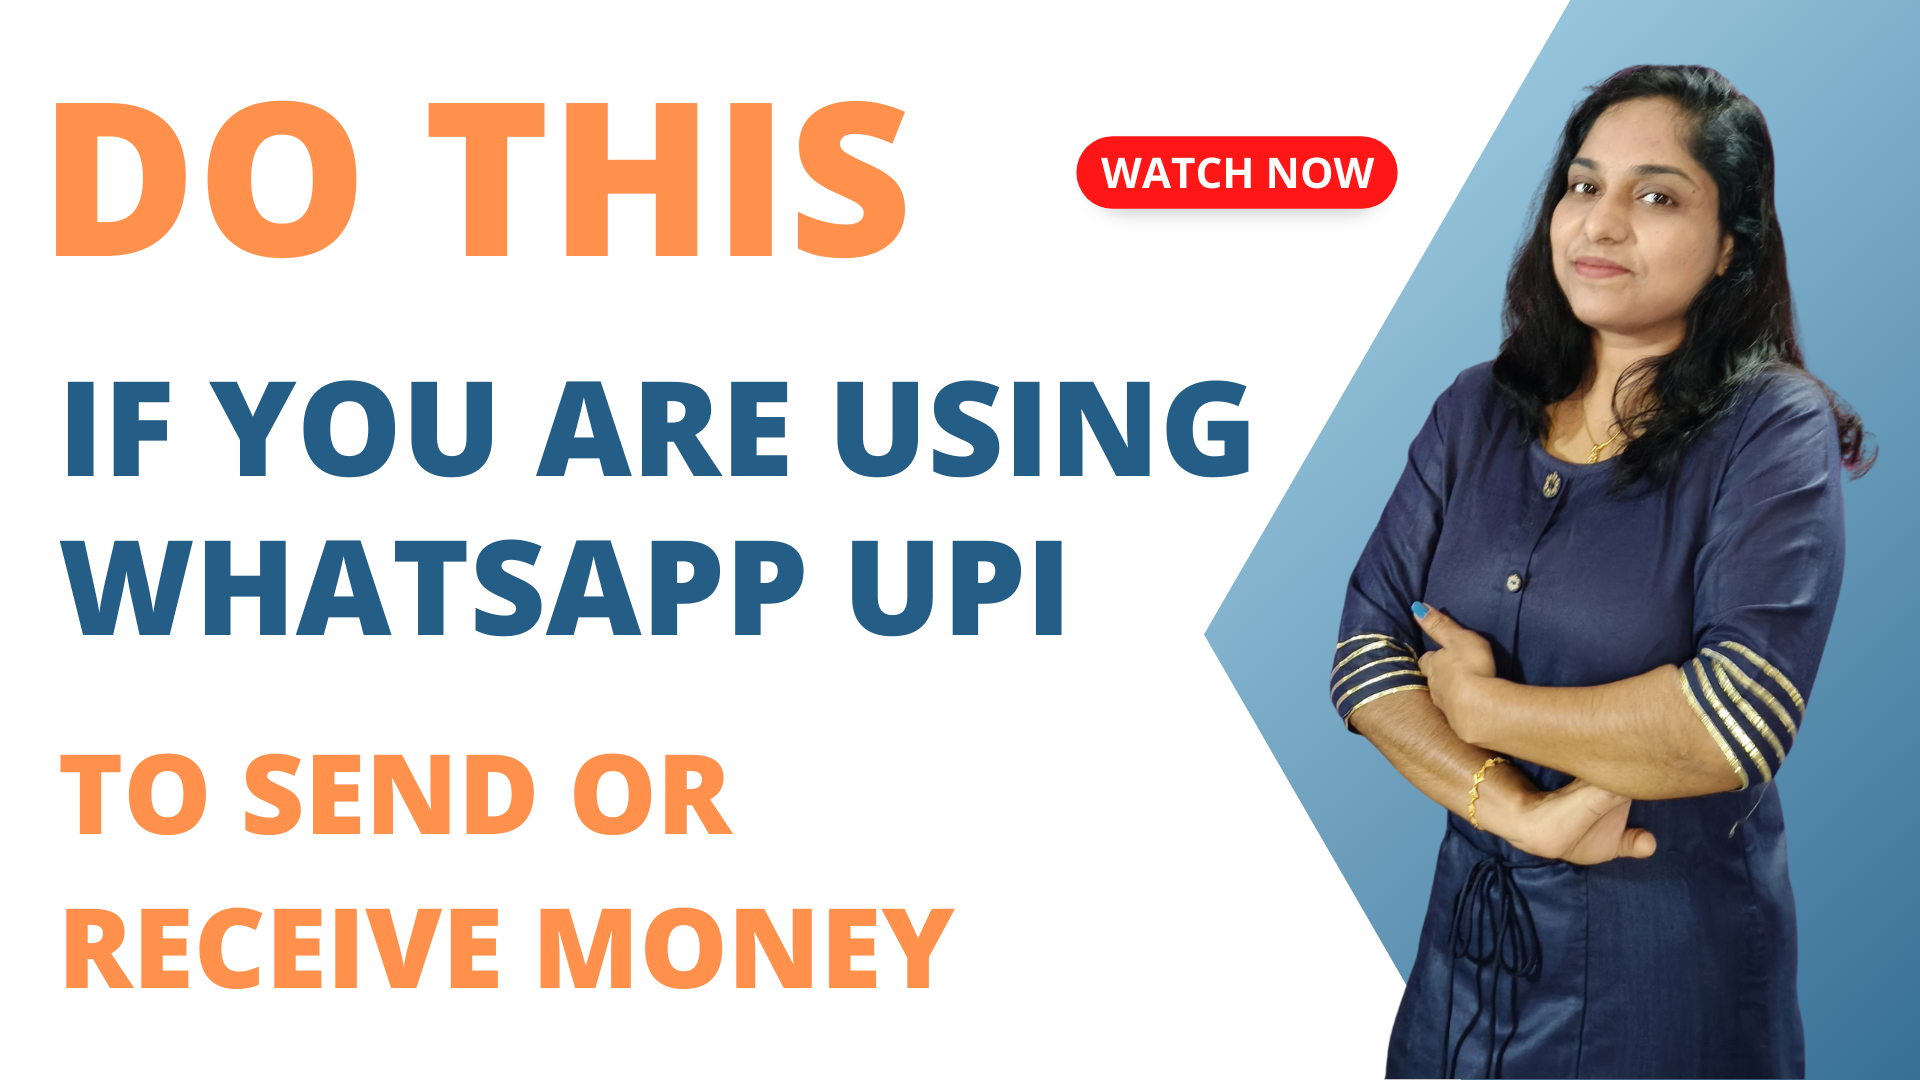 WhatsApp UPI | Do This If You are Using WhatsApp UPI For Sending Or Receiving Money